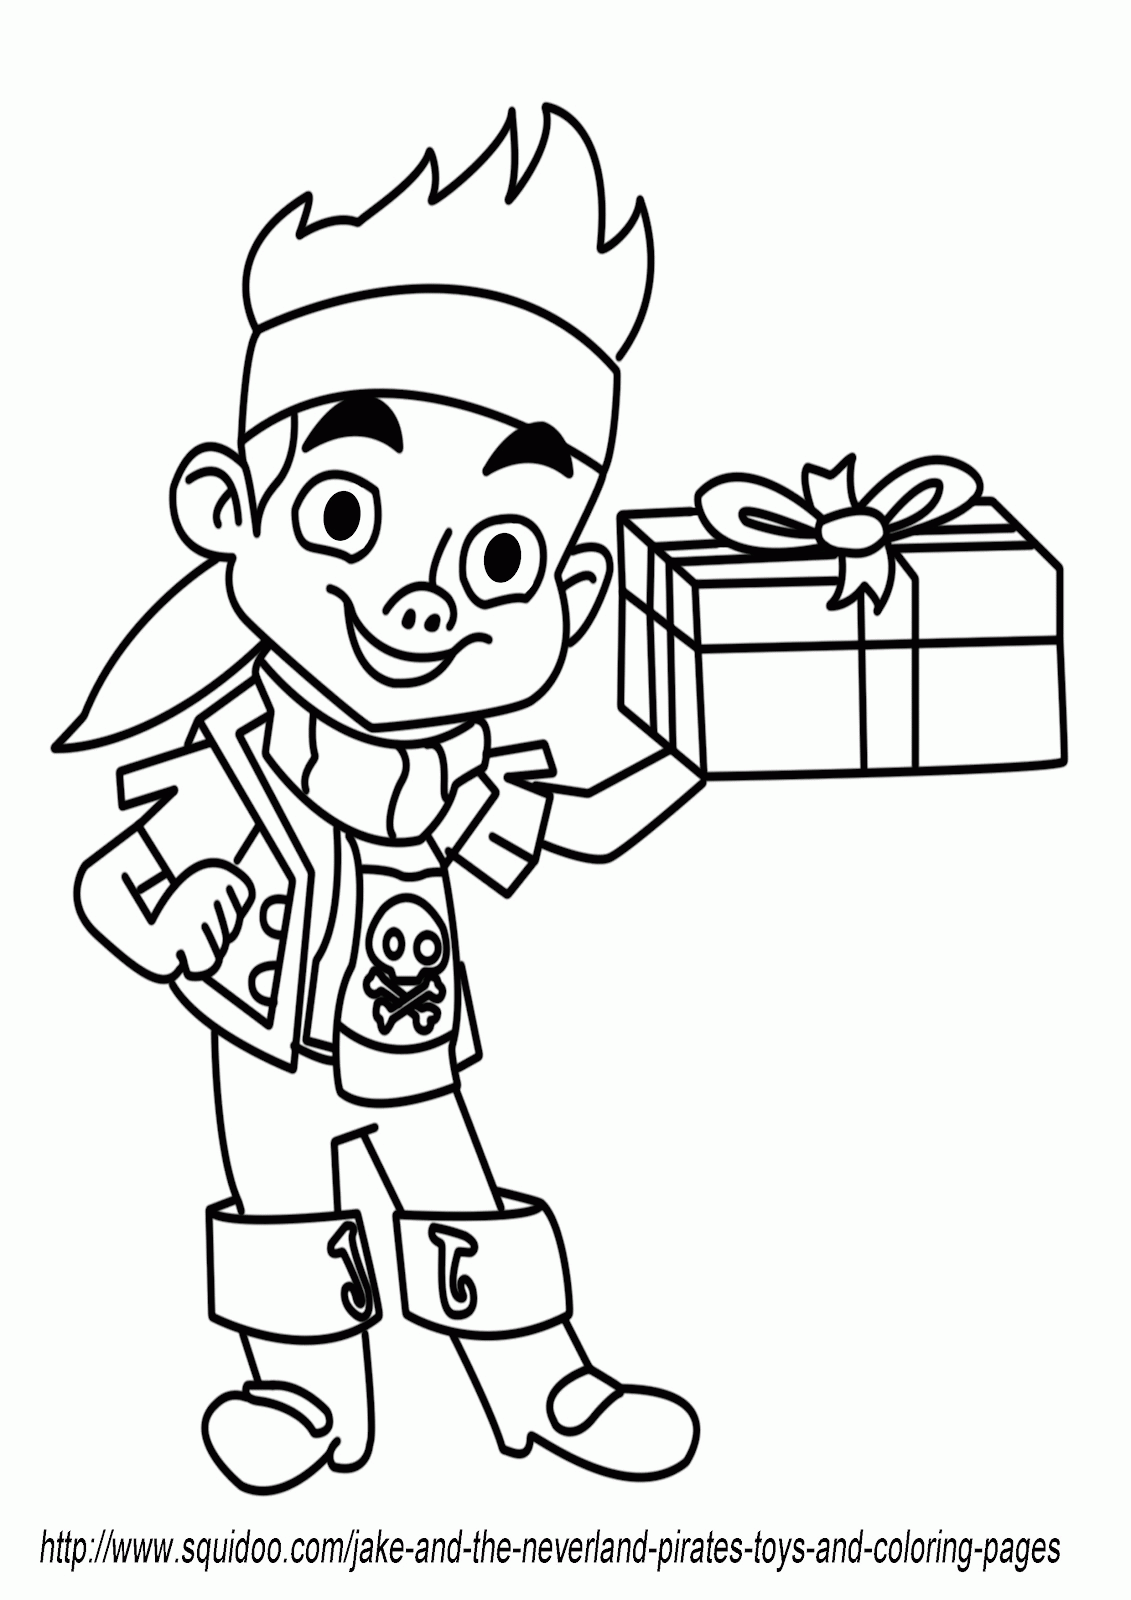 jake-and-the-neverland-pirates-coloring-pages-clip-art-library